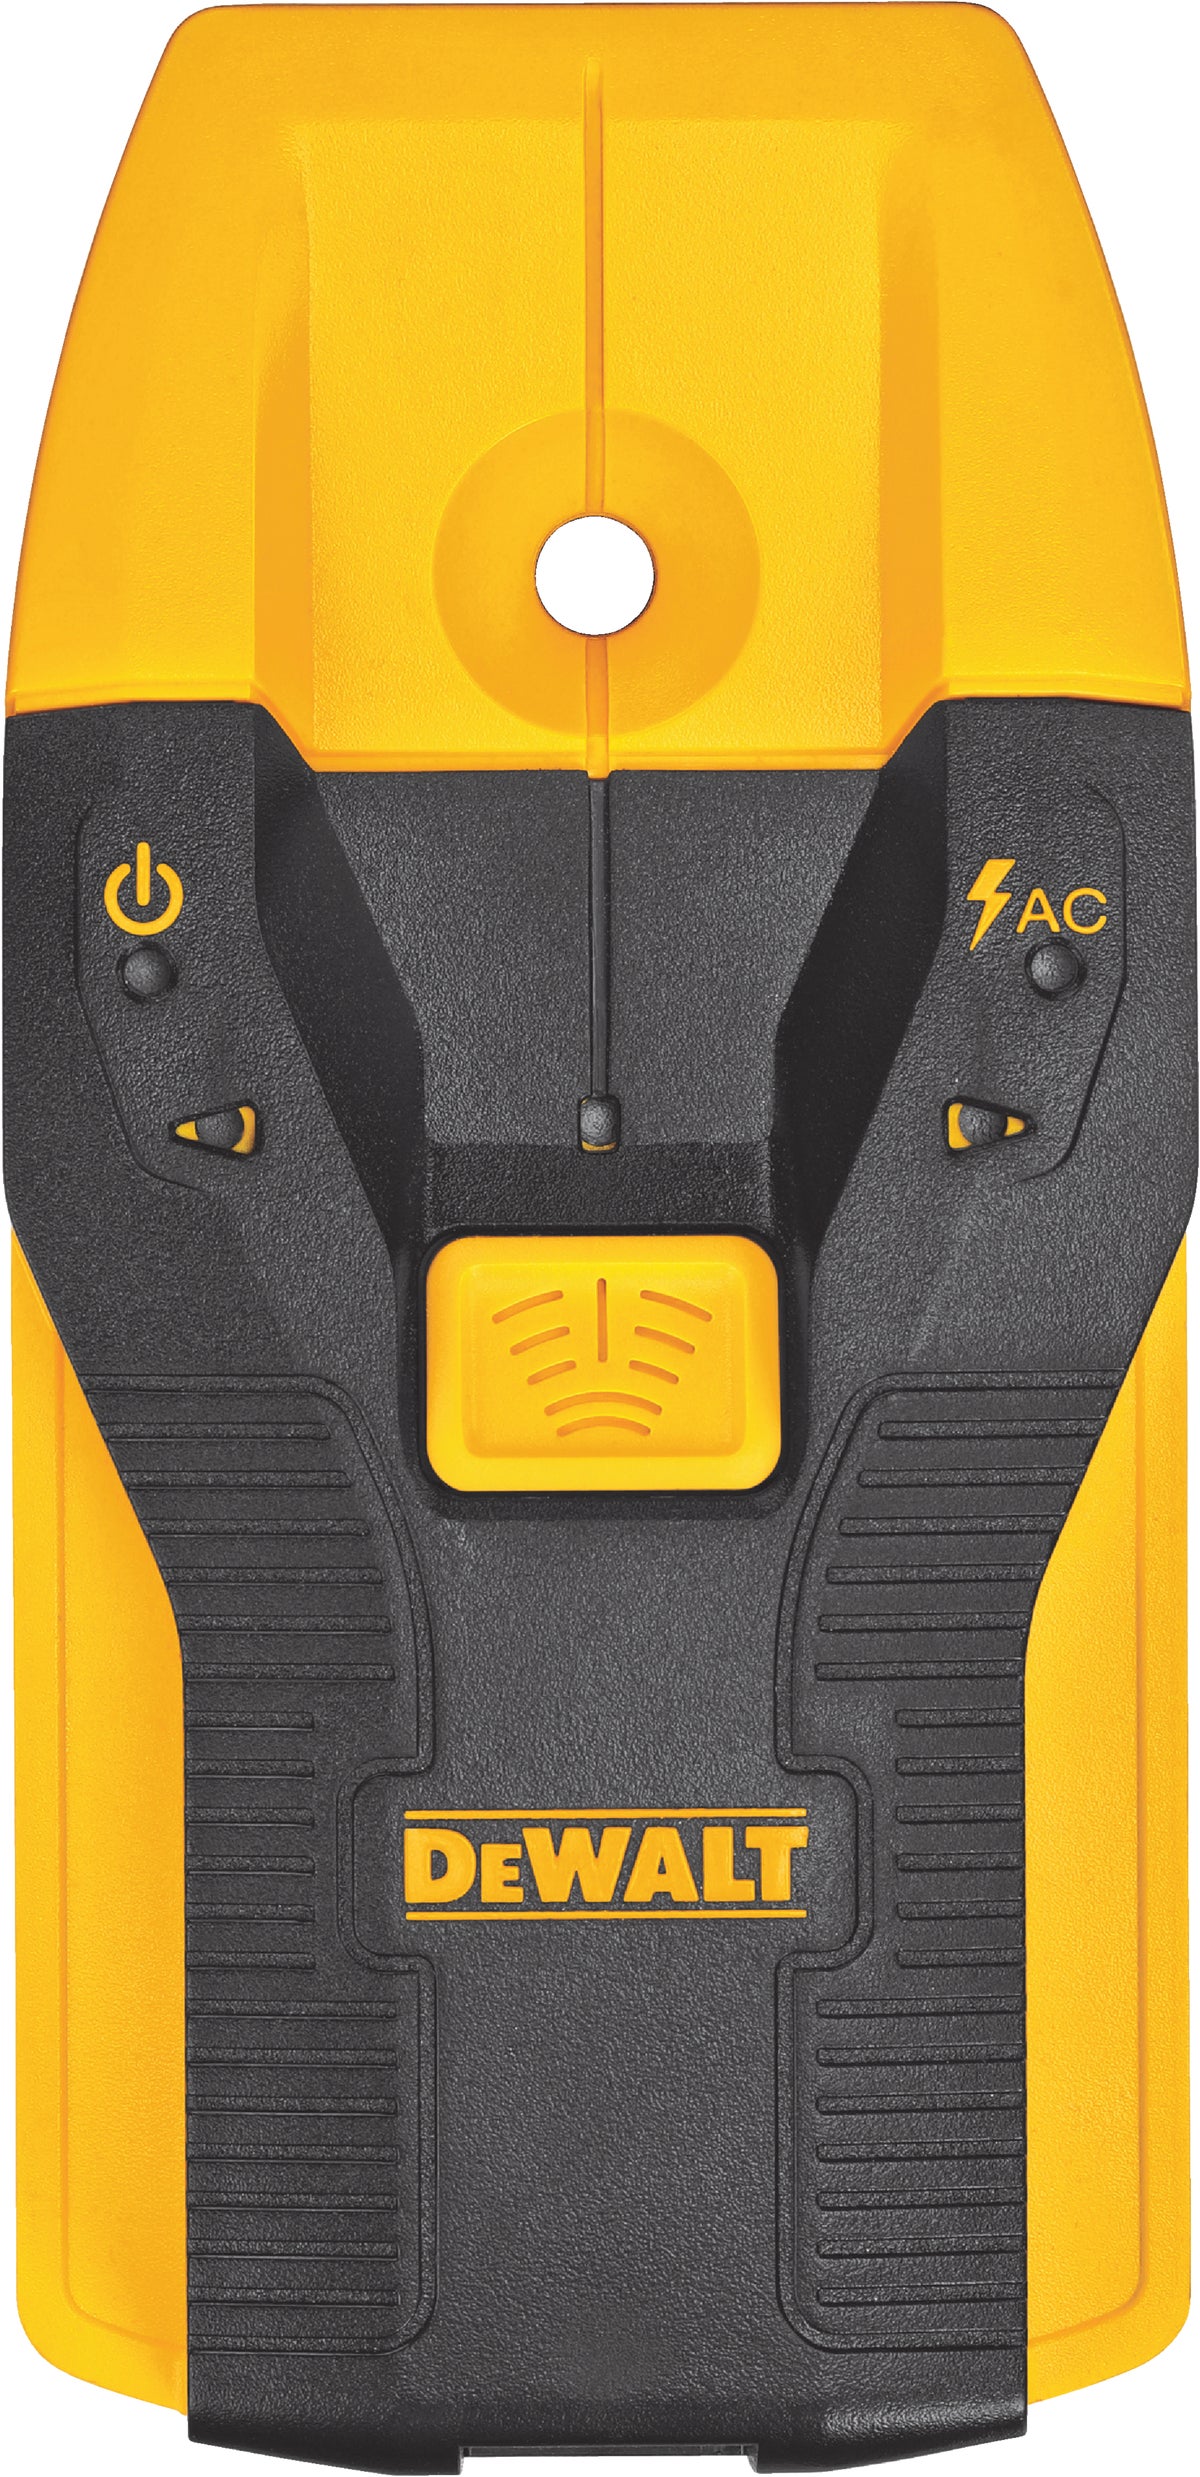 Eliminate the guesswork with this center detect stud finder that has depth ...